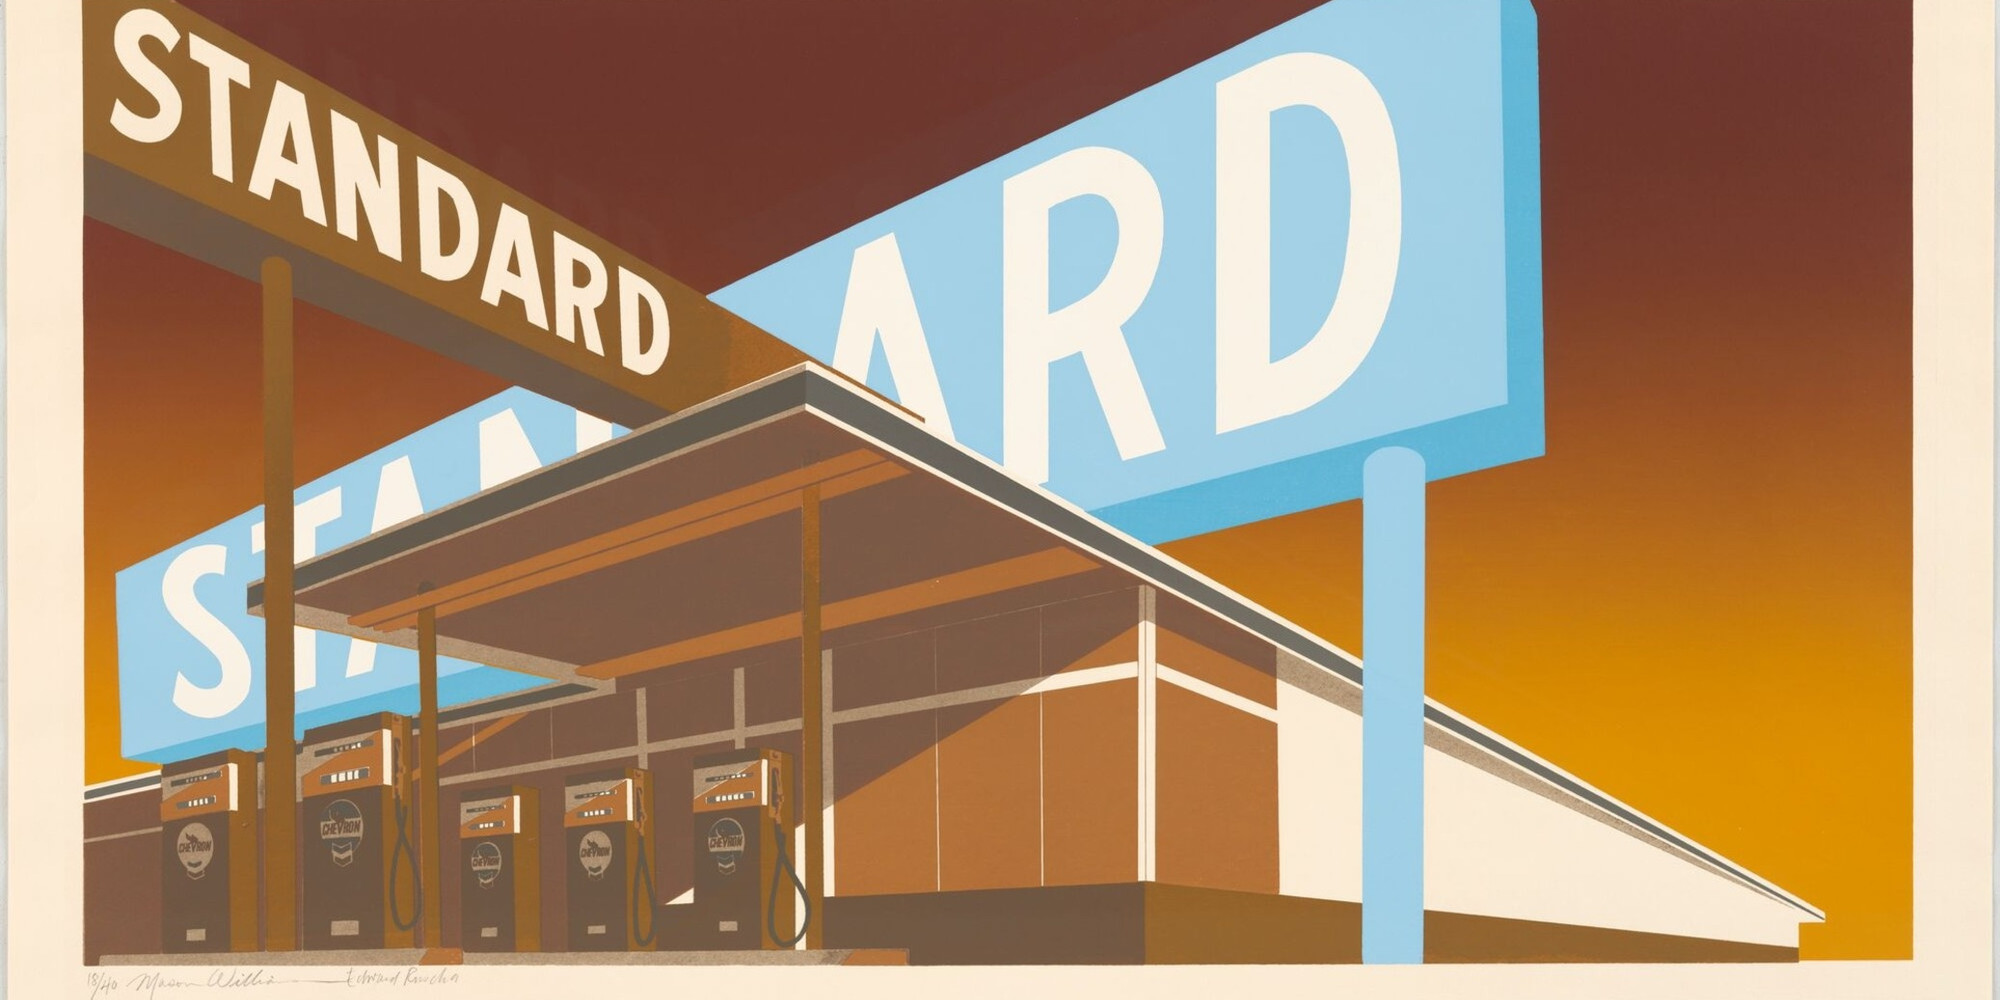 Edward Ruscha, Mason Williams. Double Standard. 1969. Screenprint, composition: 20 11/16 × 37 13/16&#34; (52.5 × 96 cm); sheet: 25 3/4 × 40 3/16&#34; (65.4 × 102 cm). Publisher: Edward Ruscha. Printer: Jean Milant and Daniel Socha at the artist’s studio, Hollywood. Edition: 40. The Museum of Modern Art, New York. Gift of the Associates of the Department of Prints and Illustrated Books in celebration of the Museum’s reopening. © 2023 Edward Ruscha